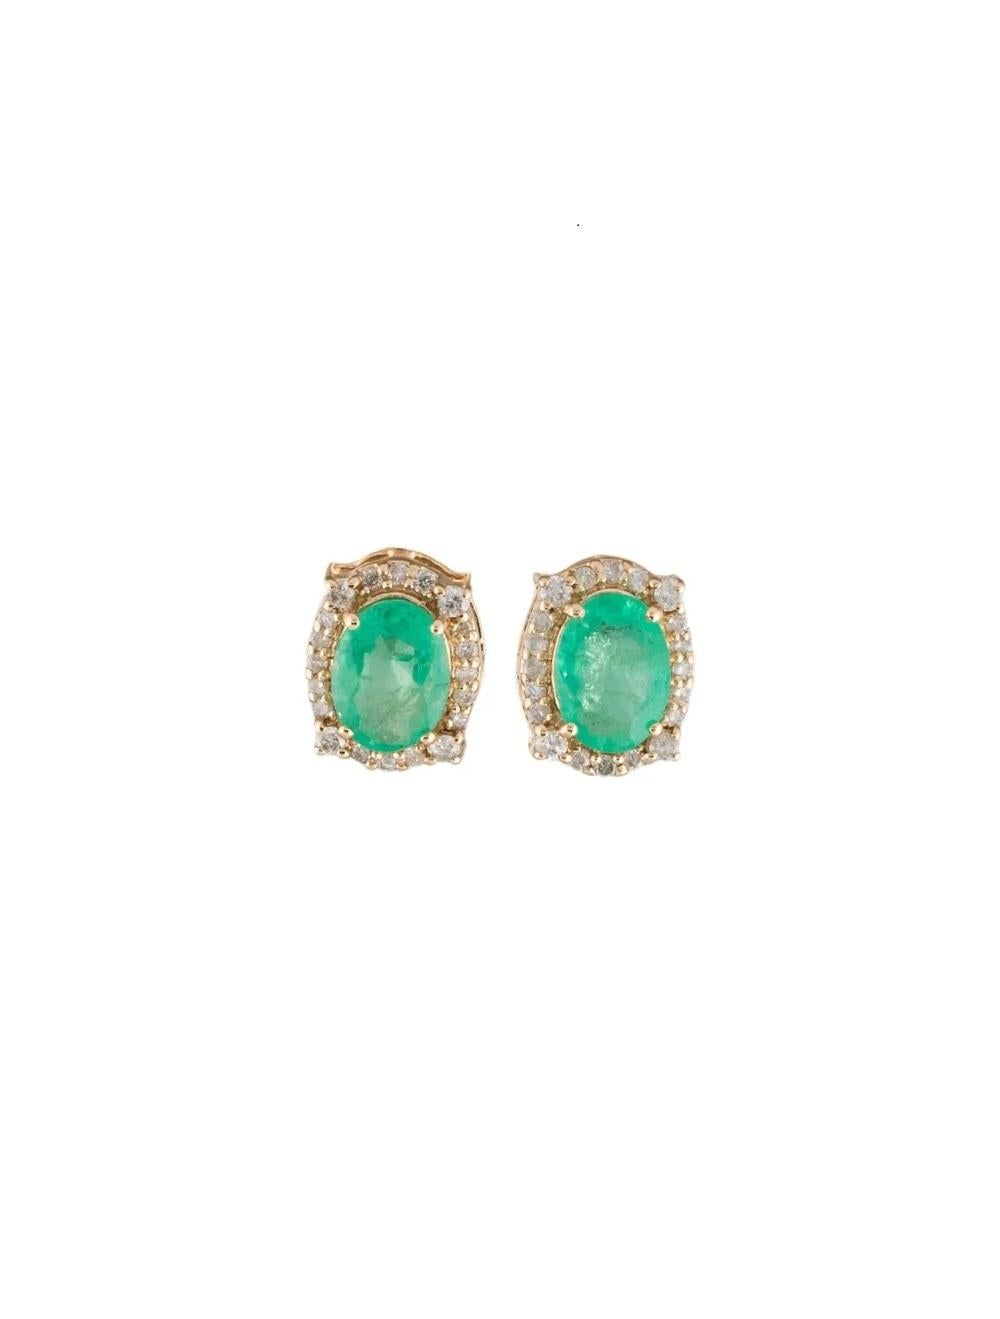 14K Emerald & Diamond Stud Earrings, 1.32ctw - Classic Design, Timeless Elegance In New Condition For Sale In Holtsville, NY